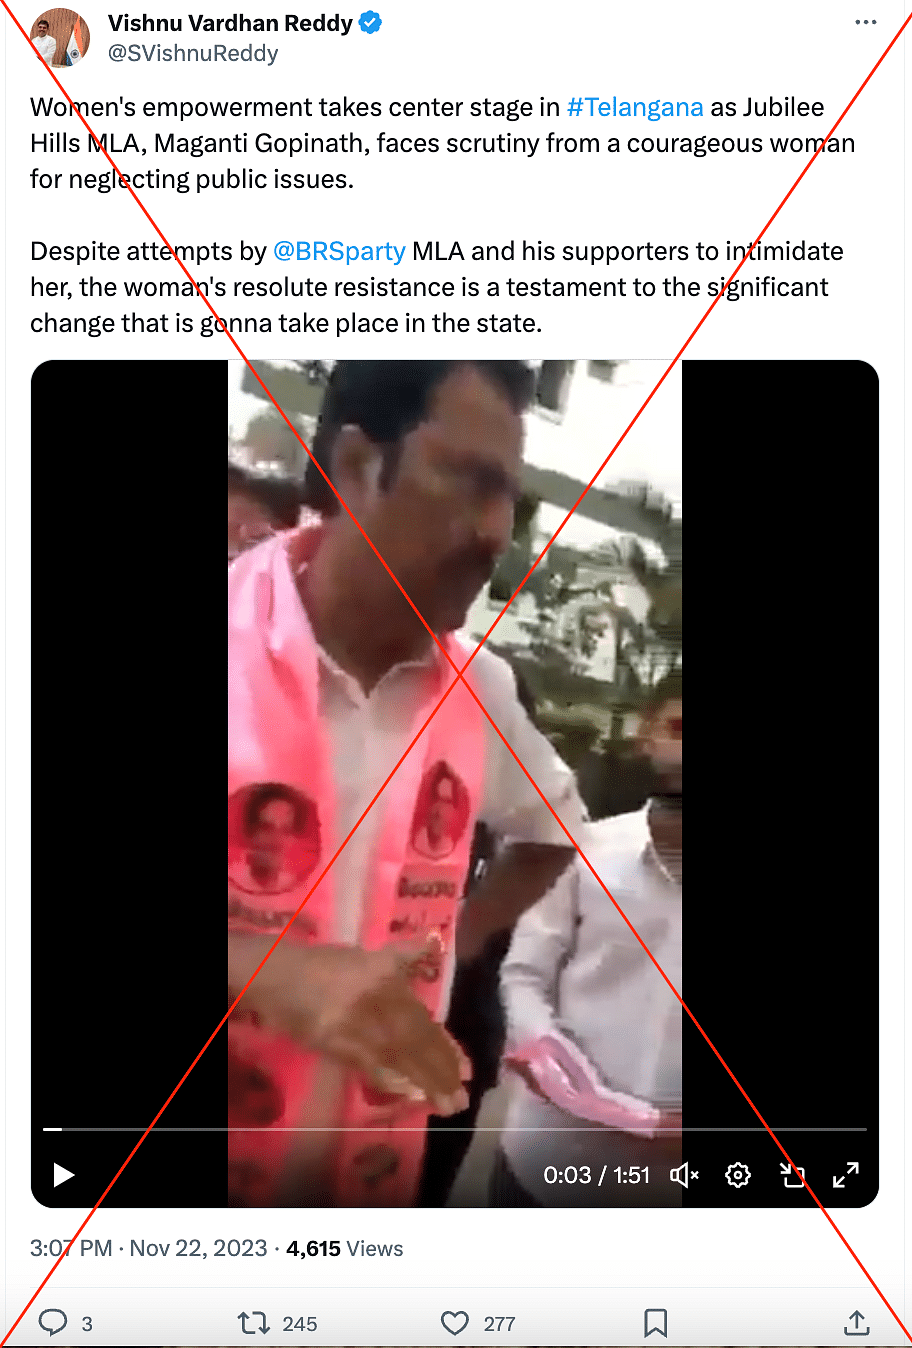 This video dates back to 2018 and is being falsely shared as recent during the Telangana elections.